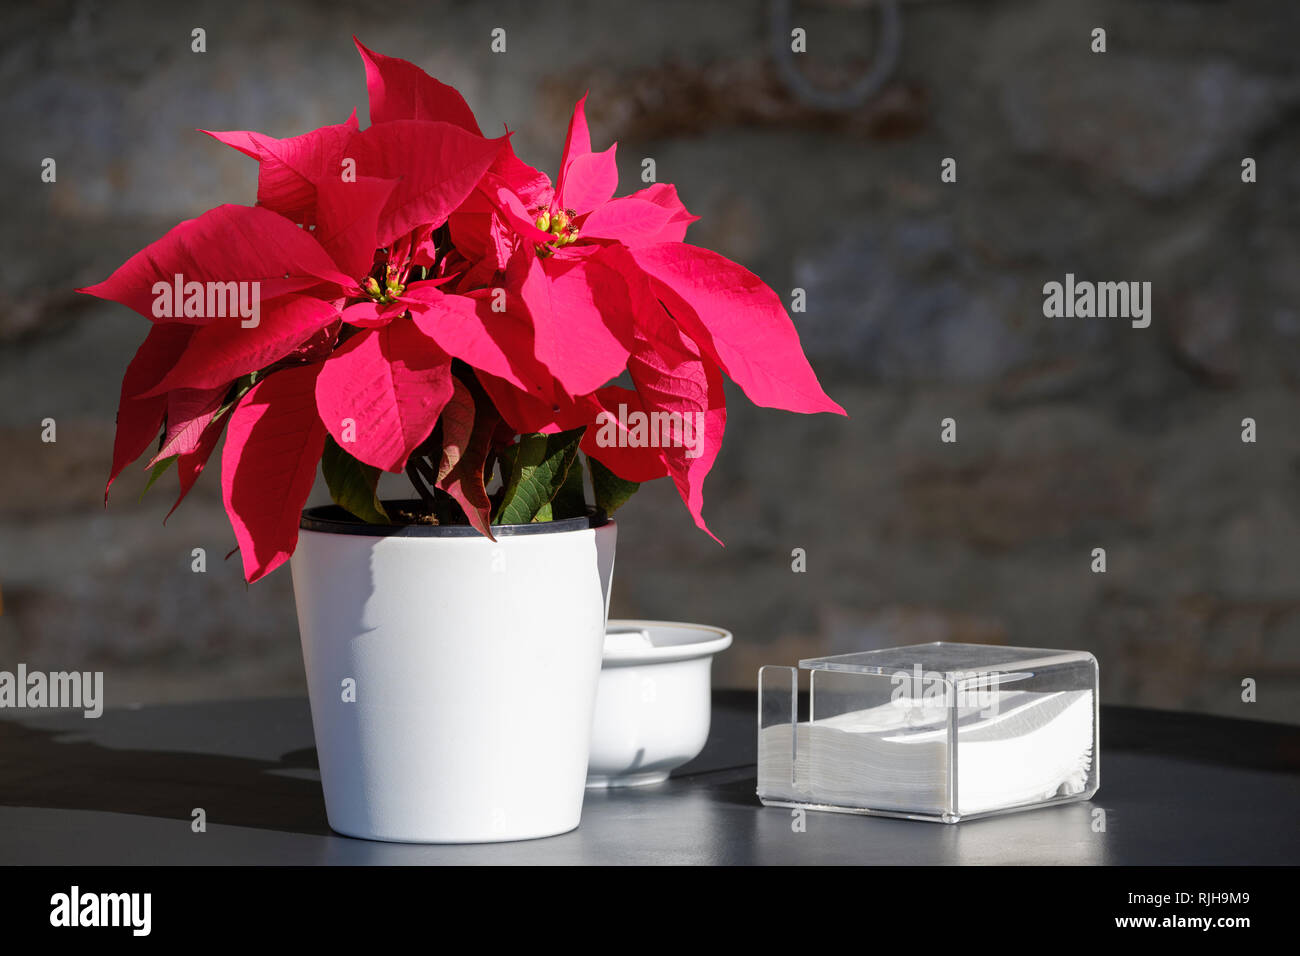 Poinsettia; Euphorbia pulcherrima; in pot on table with serviettes and holder, Stock Photo